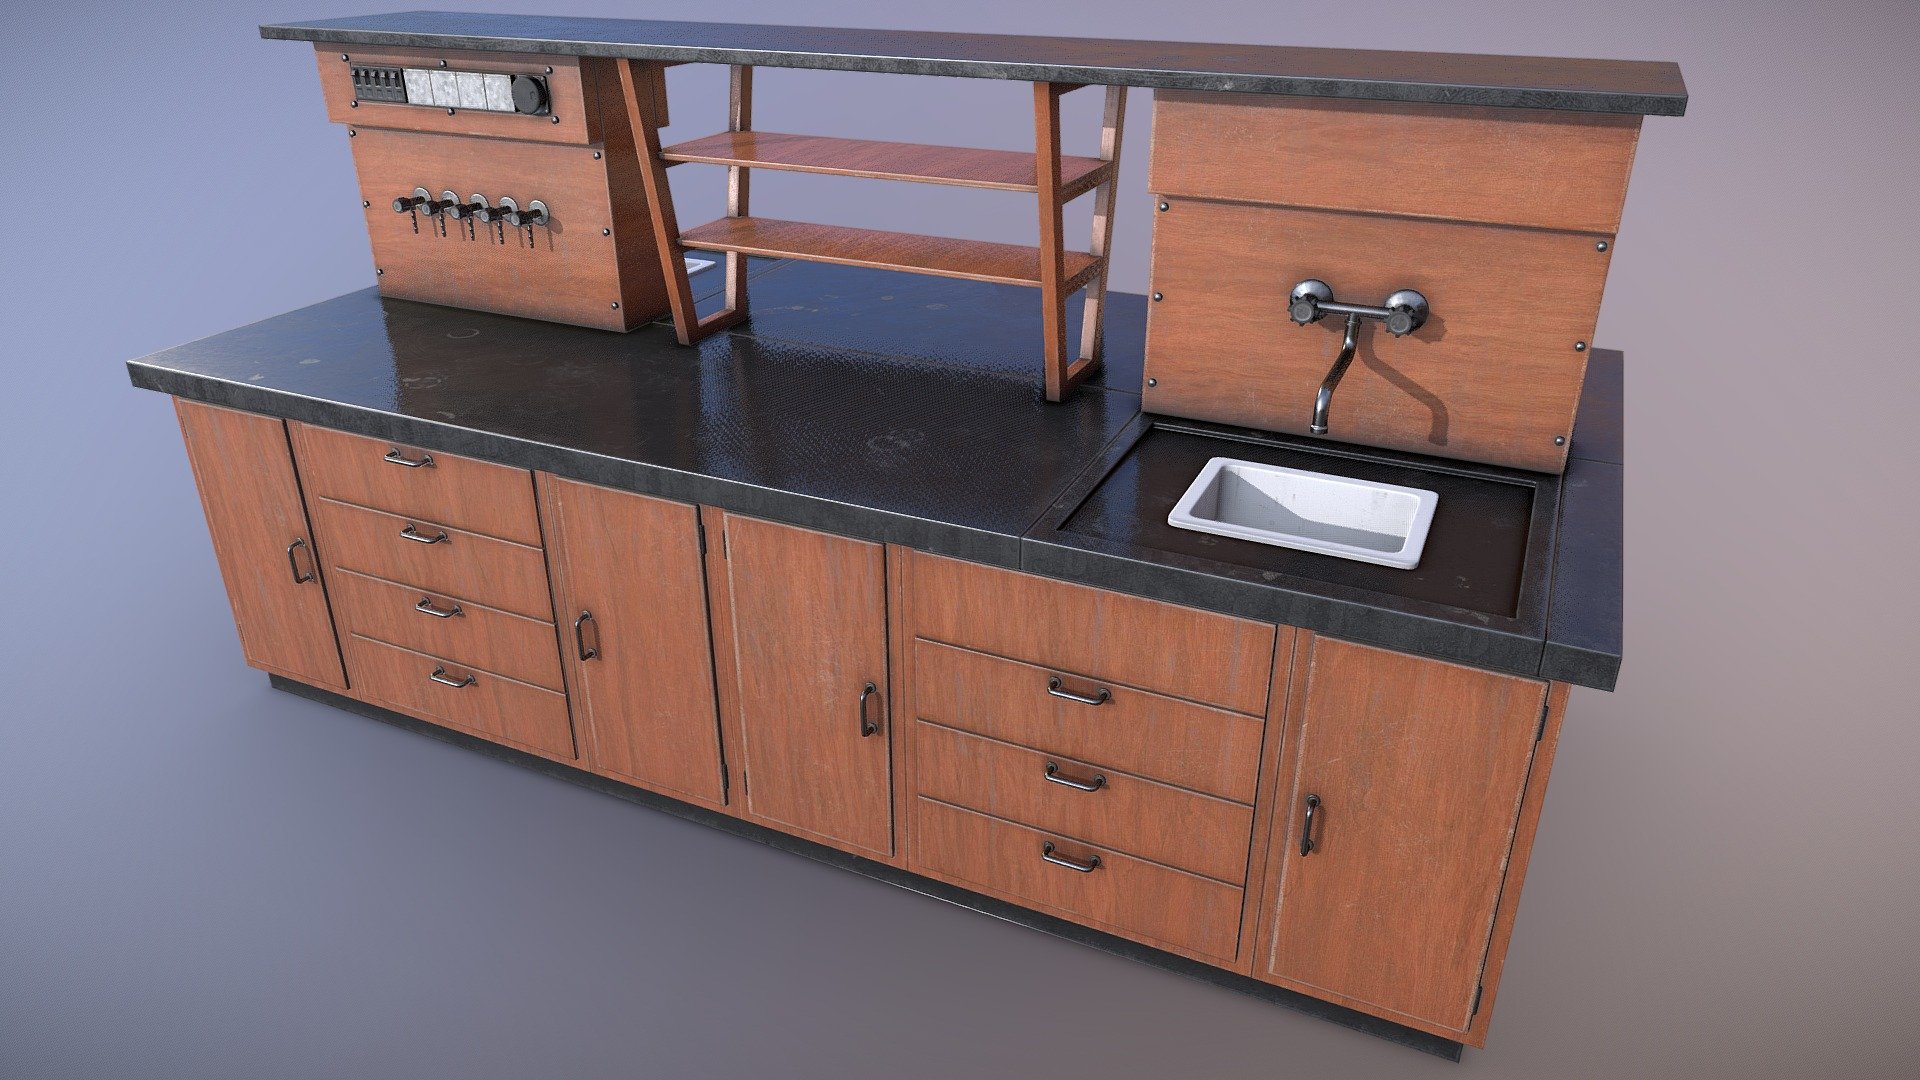 Lab table for PBR game engines.

Originally modeled in 3ds Max 2019. Download includes .max, .fbx, .obj, metal/roughness PBR textures, specular/gloss PBR textures, textures for Unity and Unreal Engines, and additional texture maps such as curvature, and UV templates.

Specs




Model is in quads and tris, no n-gons

Scaled to approximate real world size (centiemters)

Texture paths are stripped

Textures

1 Material: 4096x4096 PBR BaseColor/Metalness/Roughness/Normal/AO

Unity Engine 5 Textures: AlbedoTransparency, MetallicSmoothness, Normal, Occlusion

Unreal Engine 4 Textures: BaseColor, Normal, RoughnessMetallicAO - Laboratory Table - Buy Royalty Free 3D model by Luchador (@Luchador90) 3d model